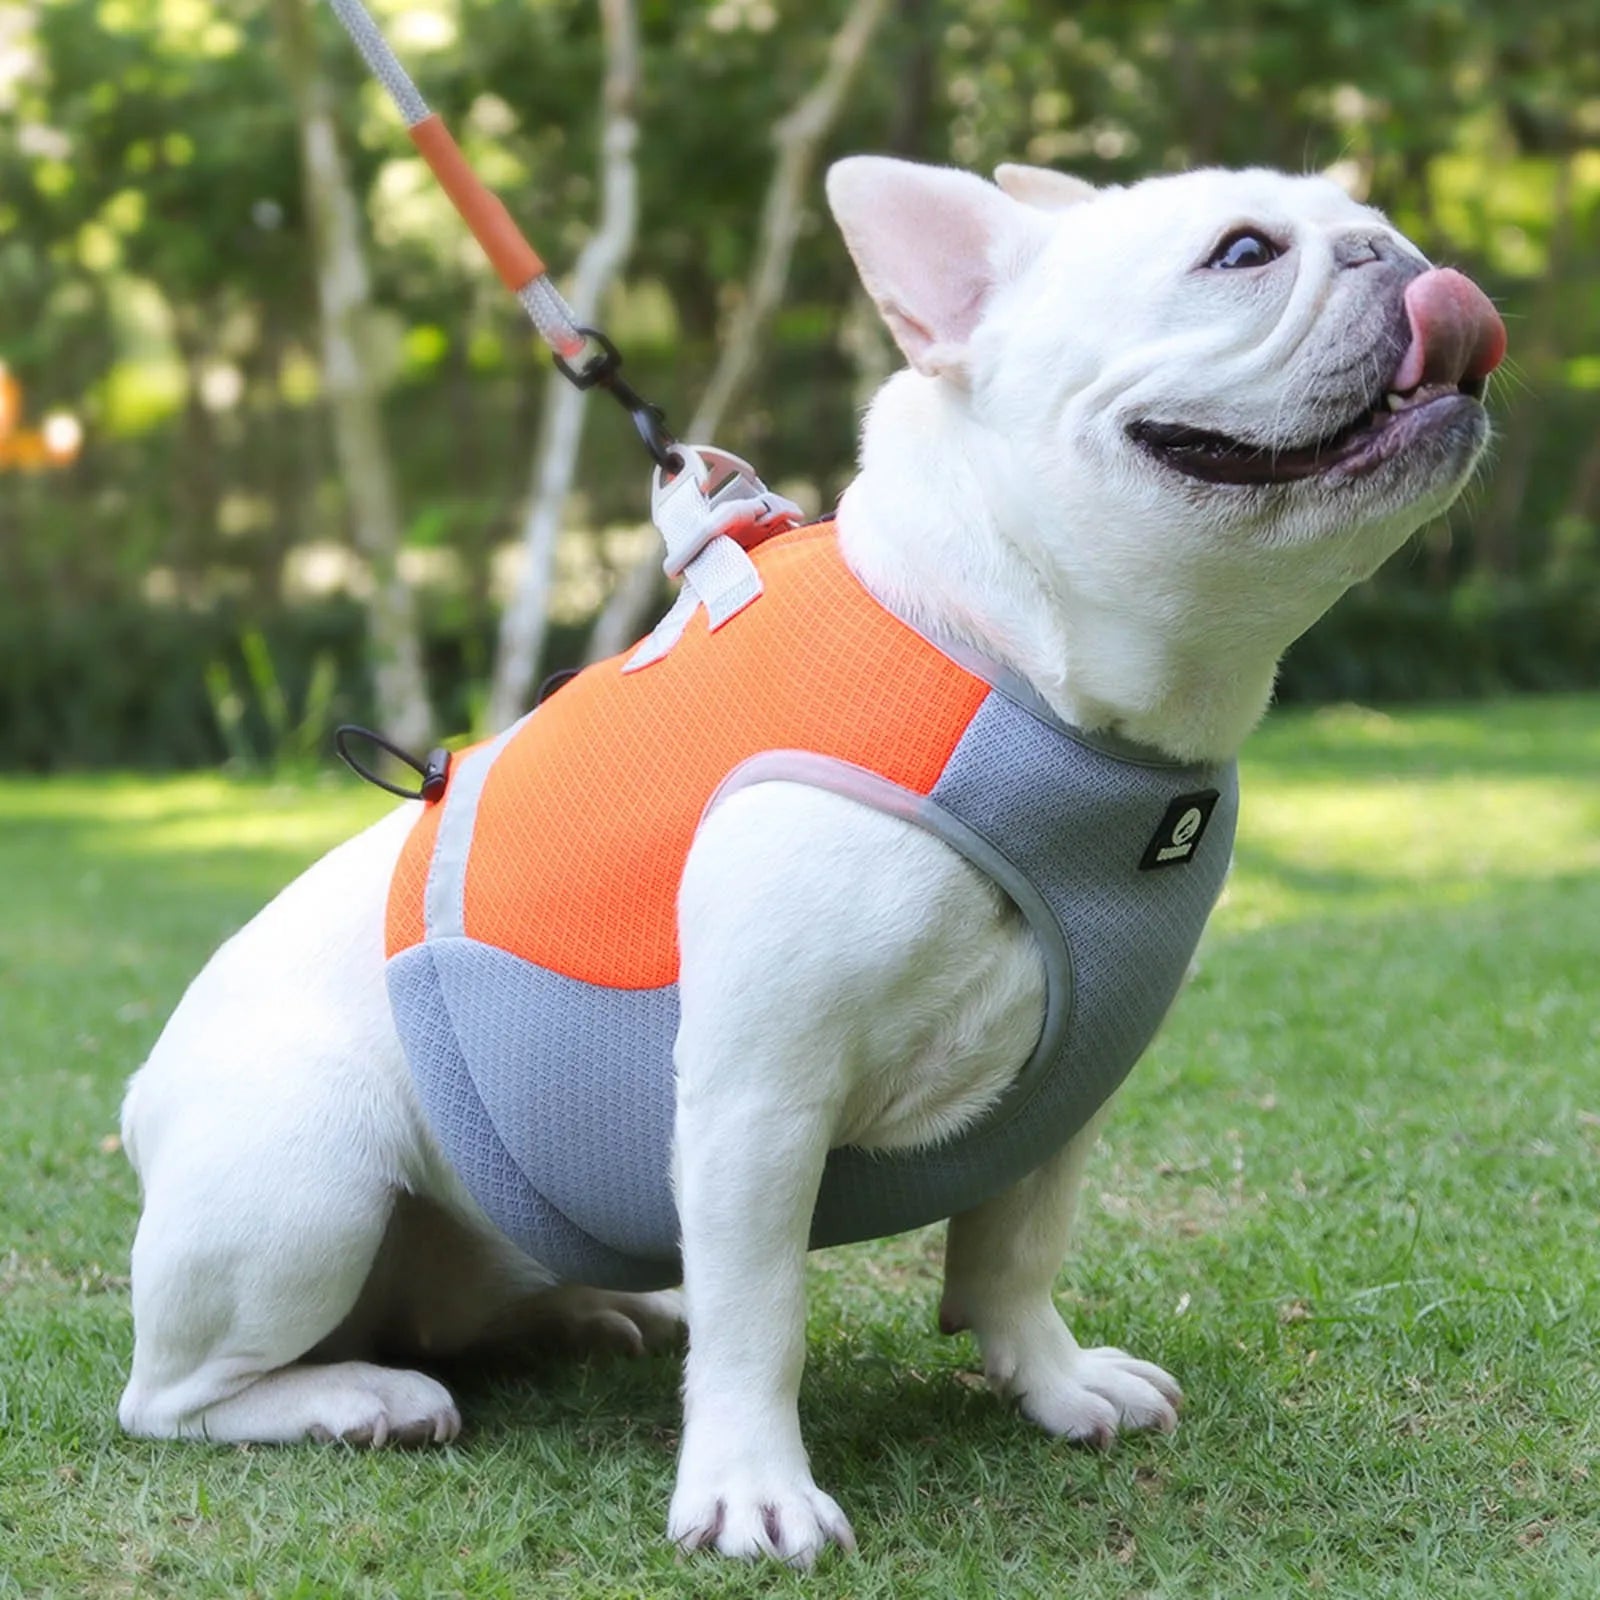 Keep Your Pet Cool with Our Summer Dog Vest - Perfect for Walking, Exercise, and Hiking!